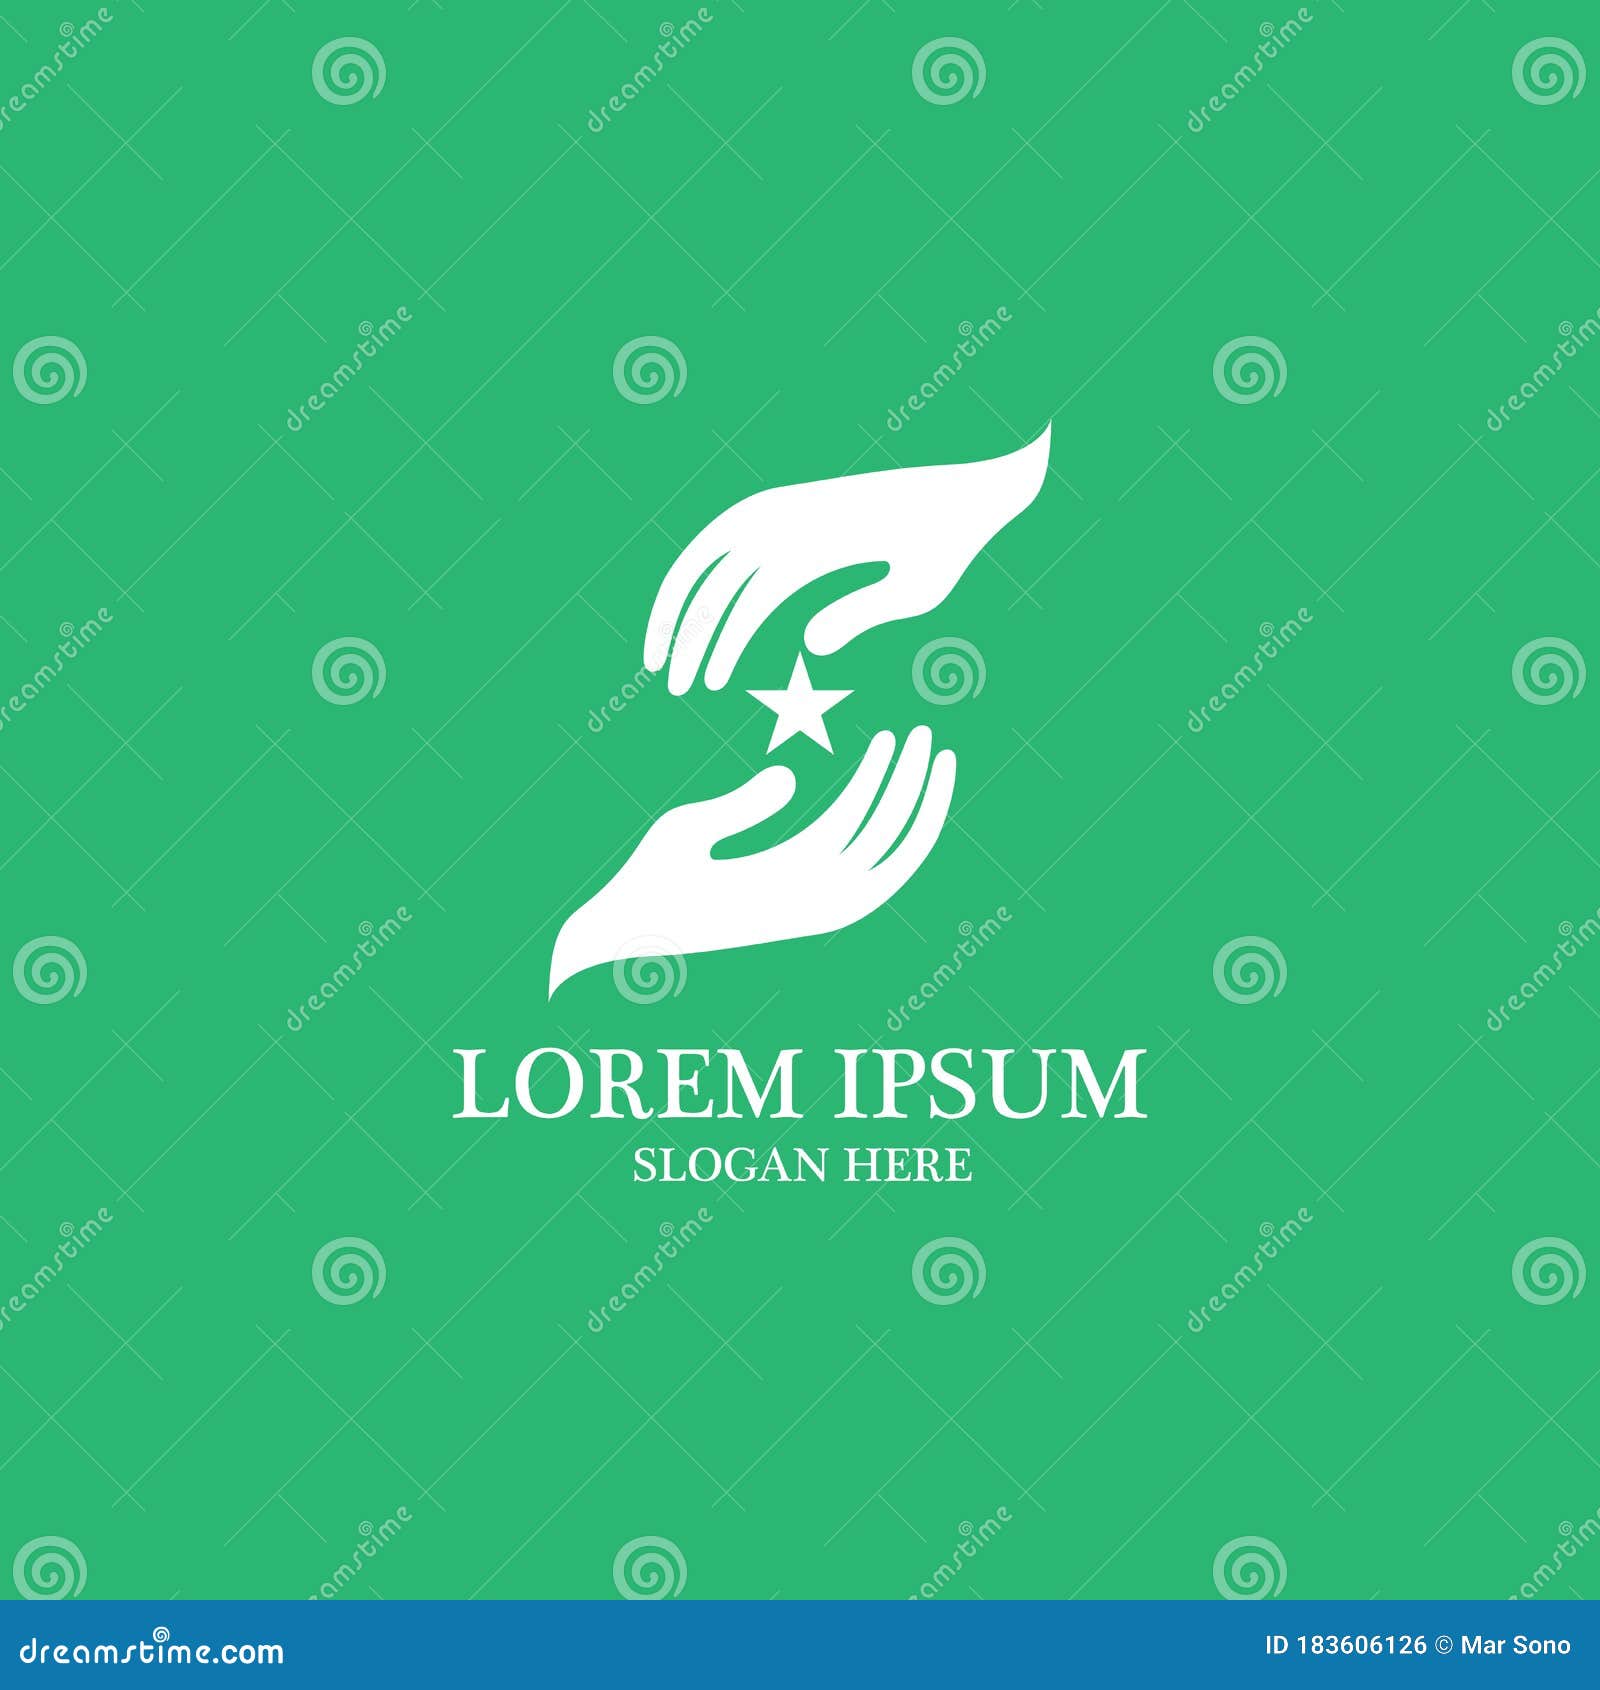 Praying Hands Logo in Green Background Stock Vector - Illustration of ...